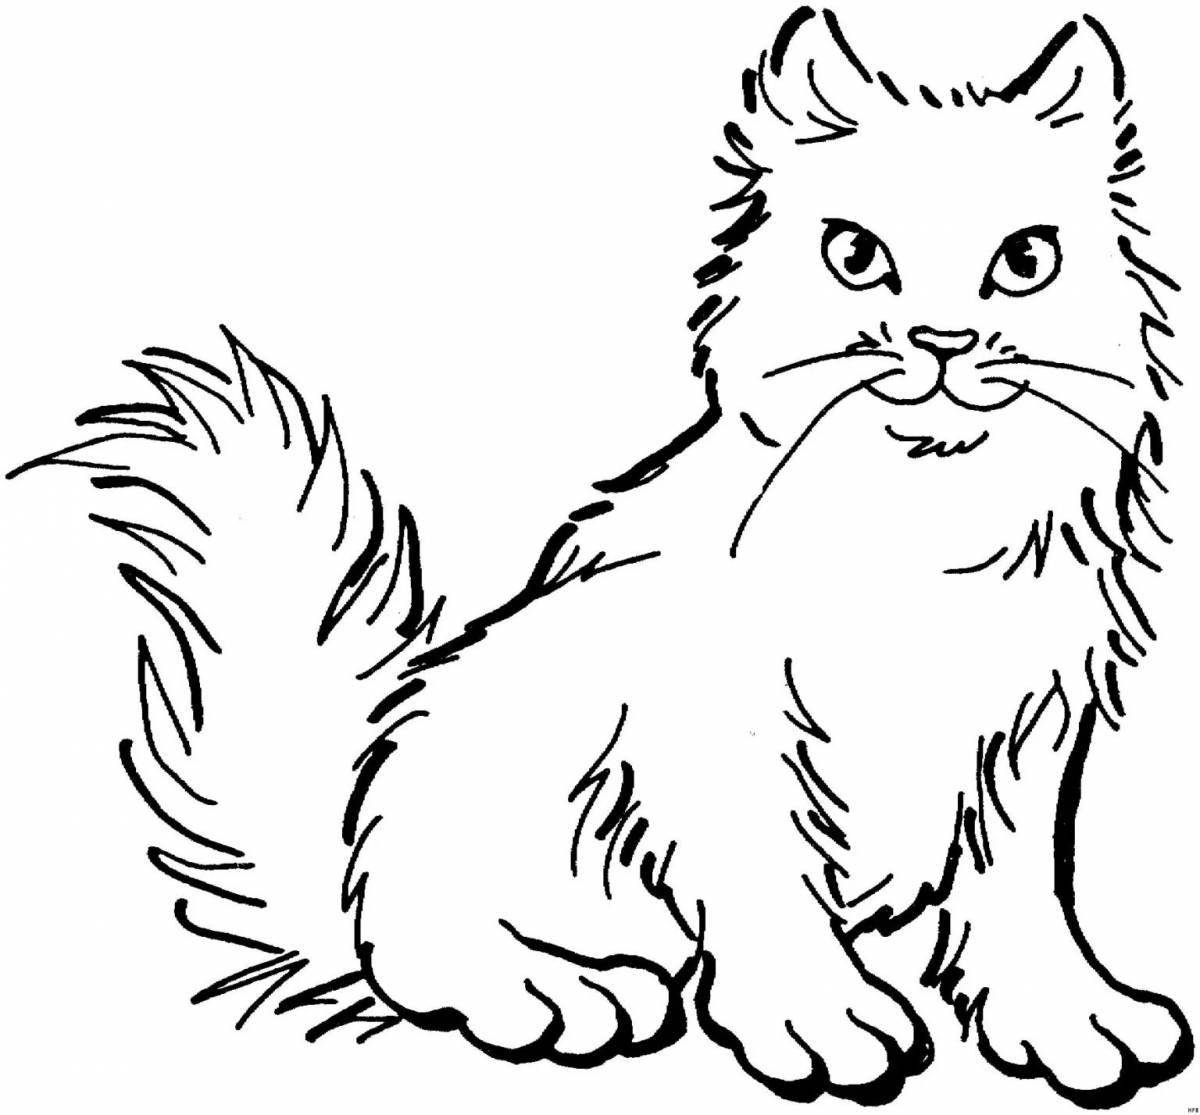 Coloring book fluffy black and white cat